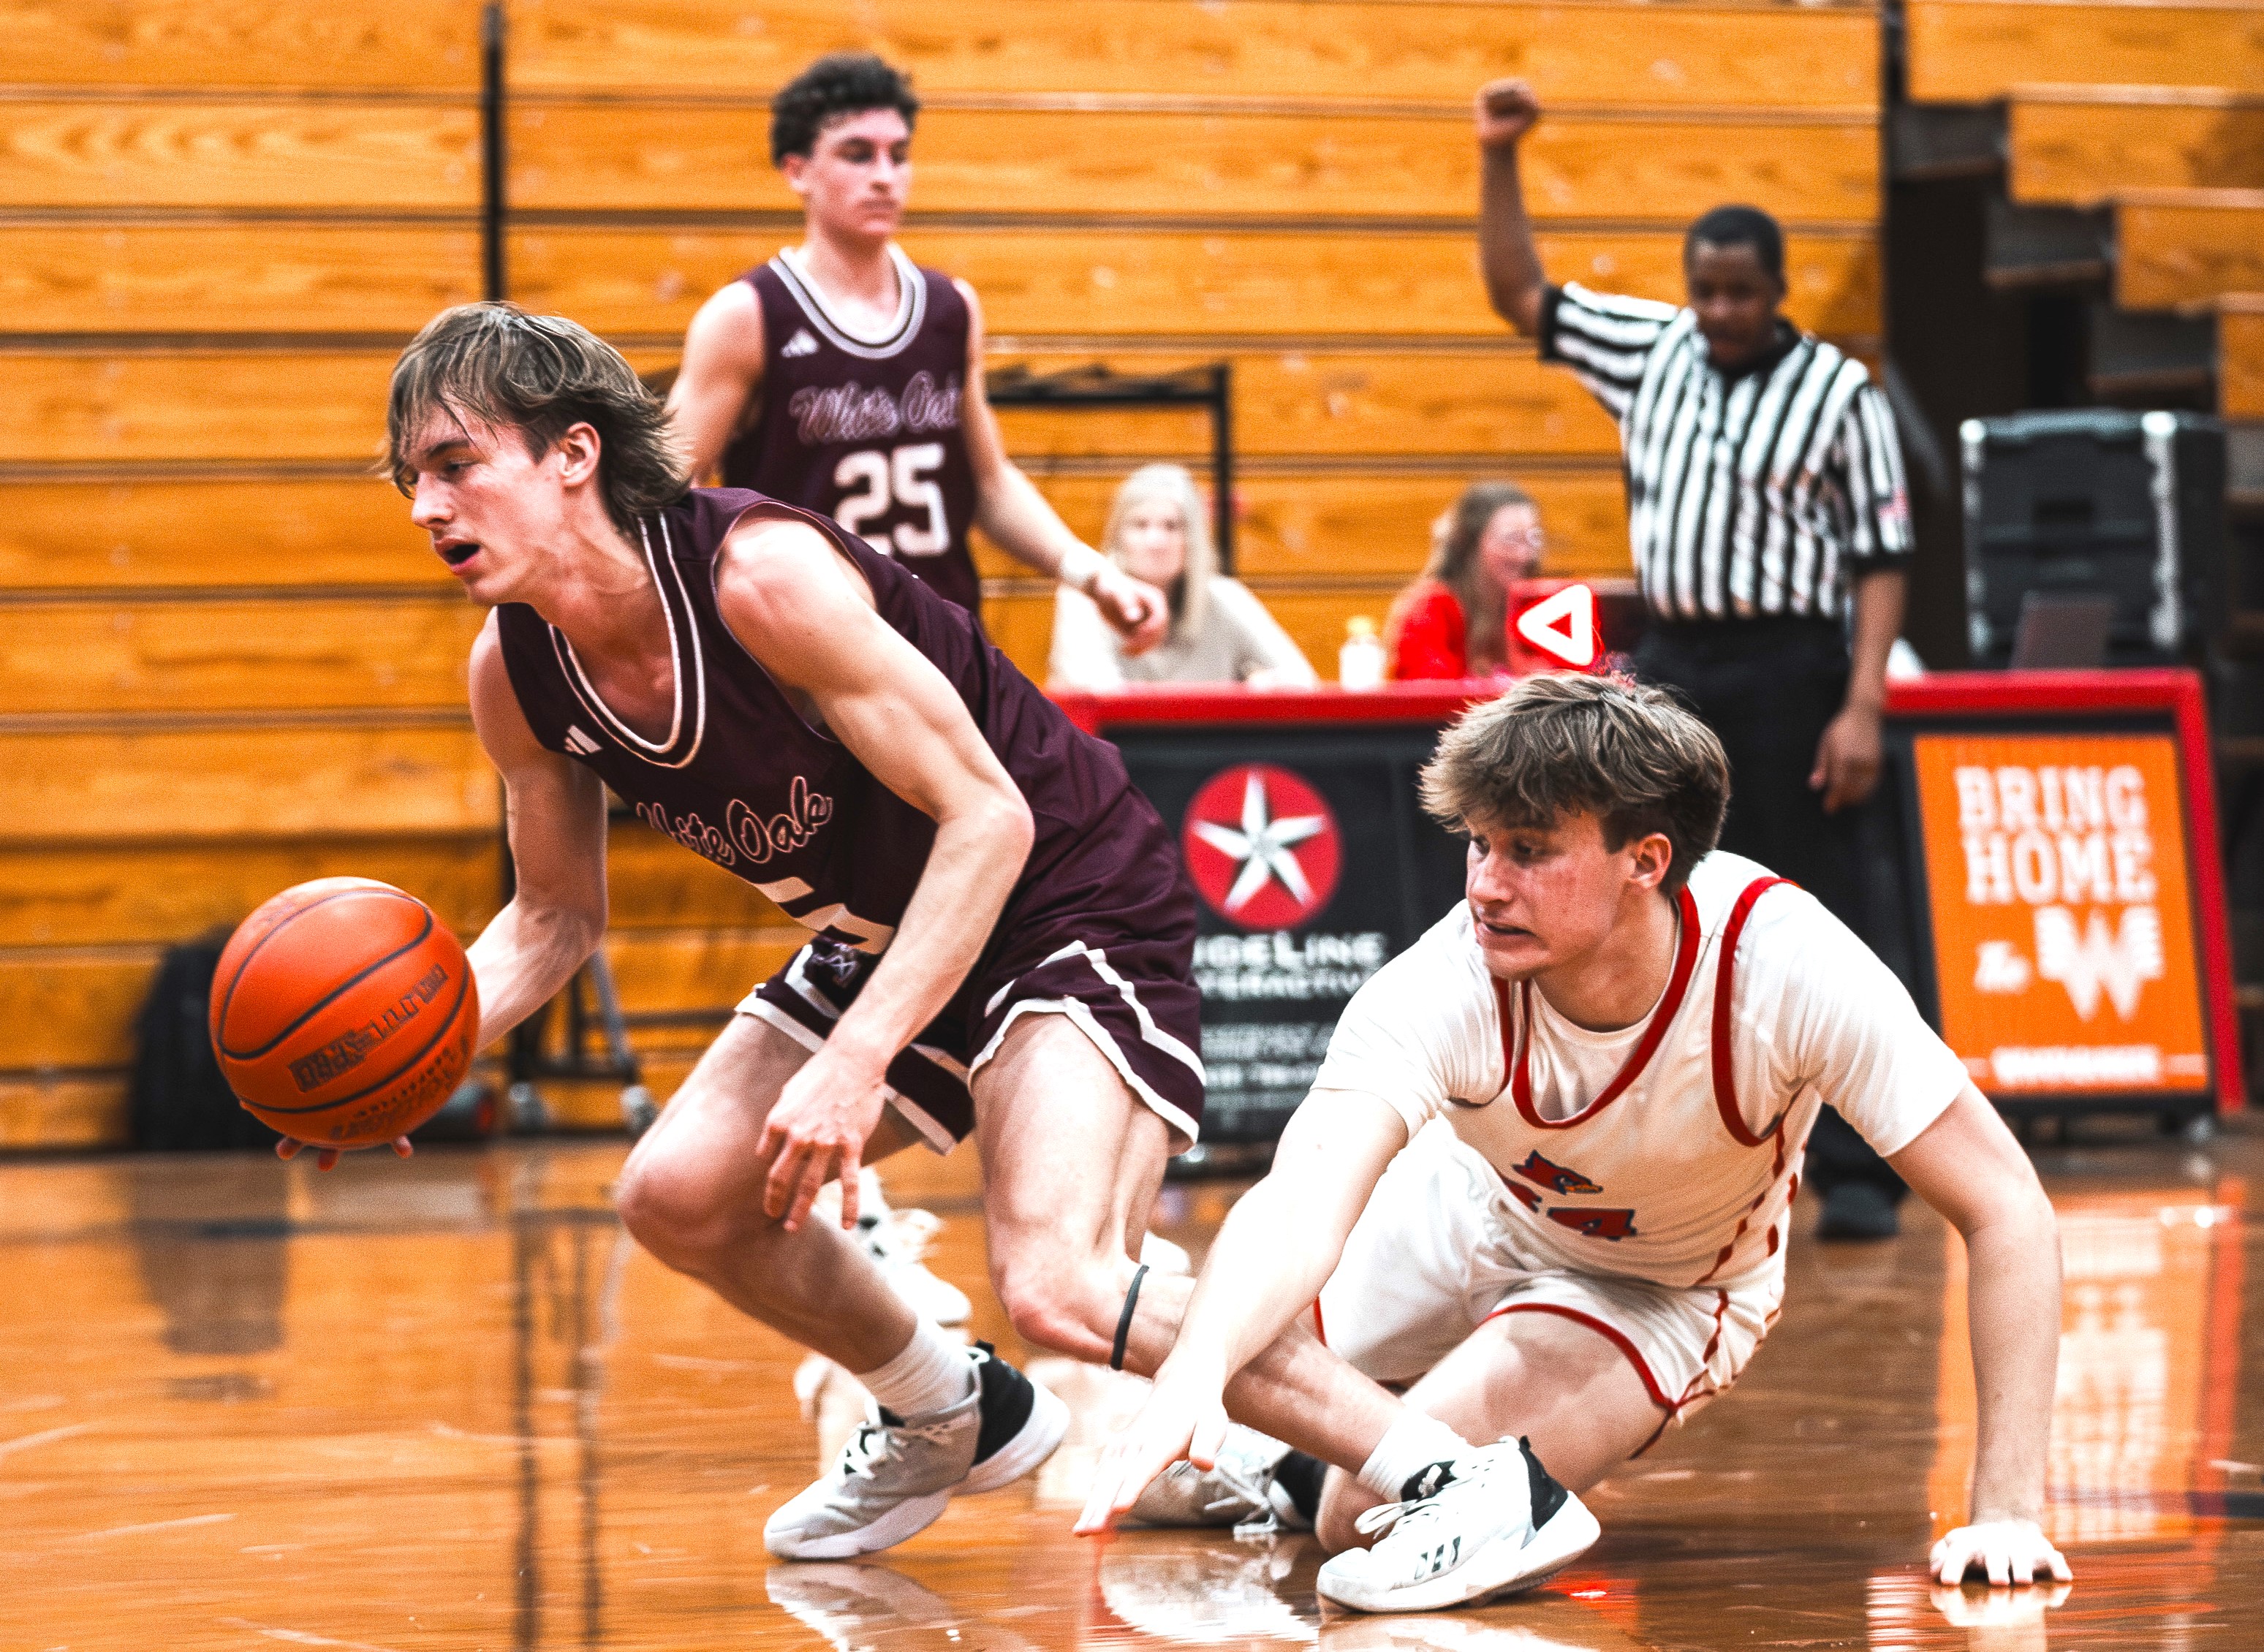 Sabine's Colt Sparks (right) plays defense against White Oak in a District 16-3A game earlier in the season. The Cardinals' season came to an end, though, on Thursday night in Longview in the second round of the Class 3A playoffs in a 45-37 loss to Winnsboro. (File photo by ALEX NABOR -ETBLITZ.COM)